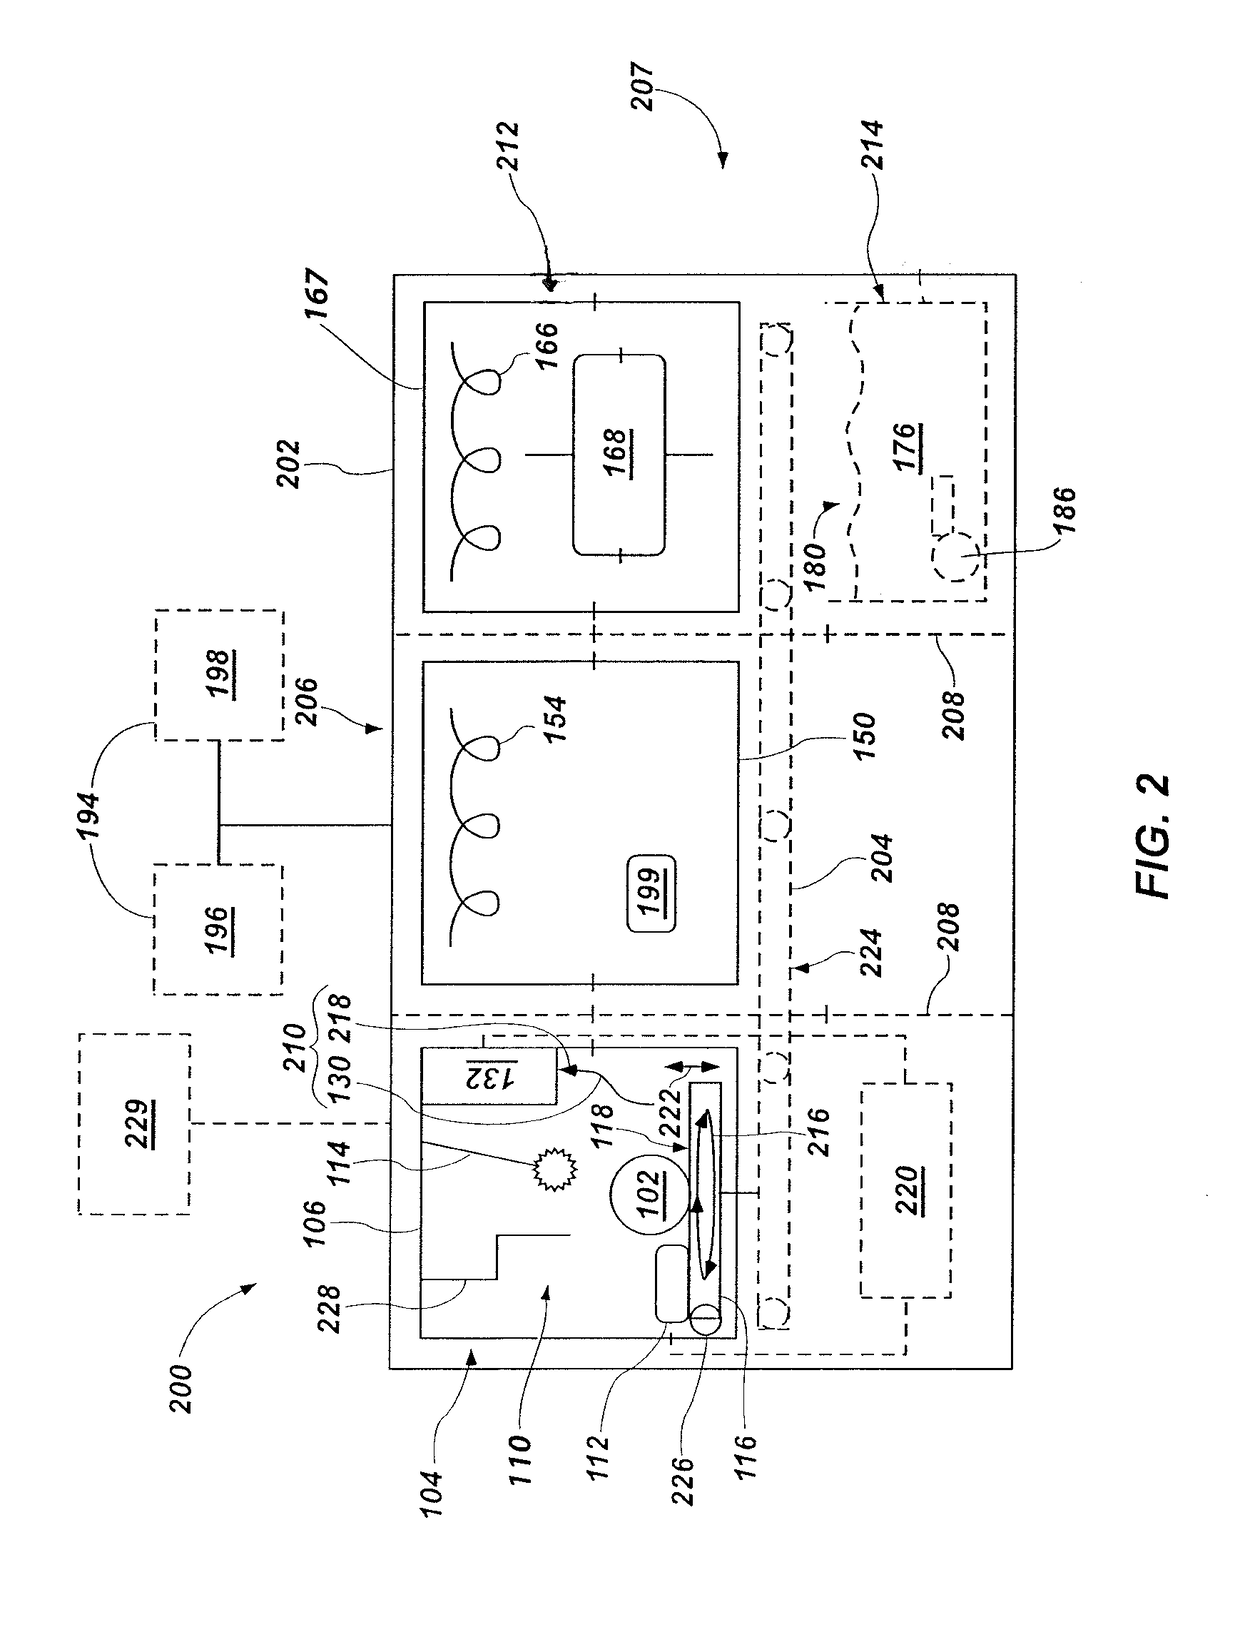 3d-printing systems configured for advanced heat treatment and related methods